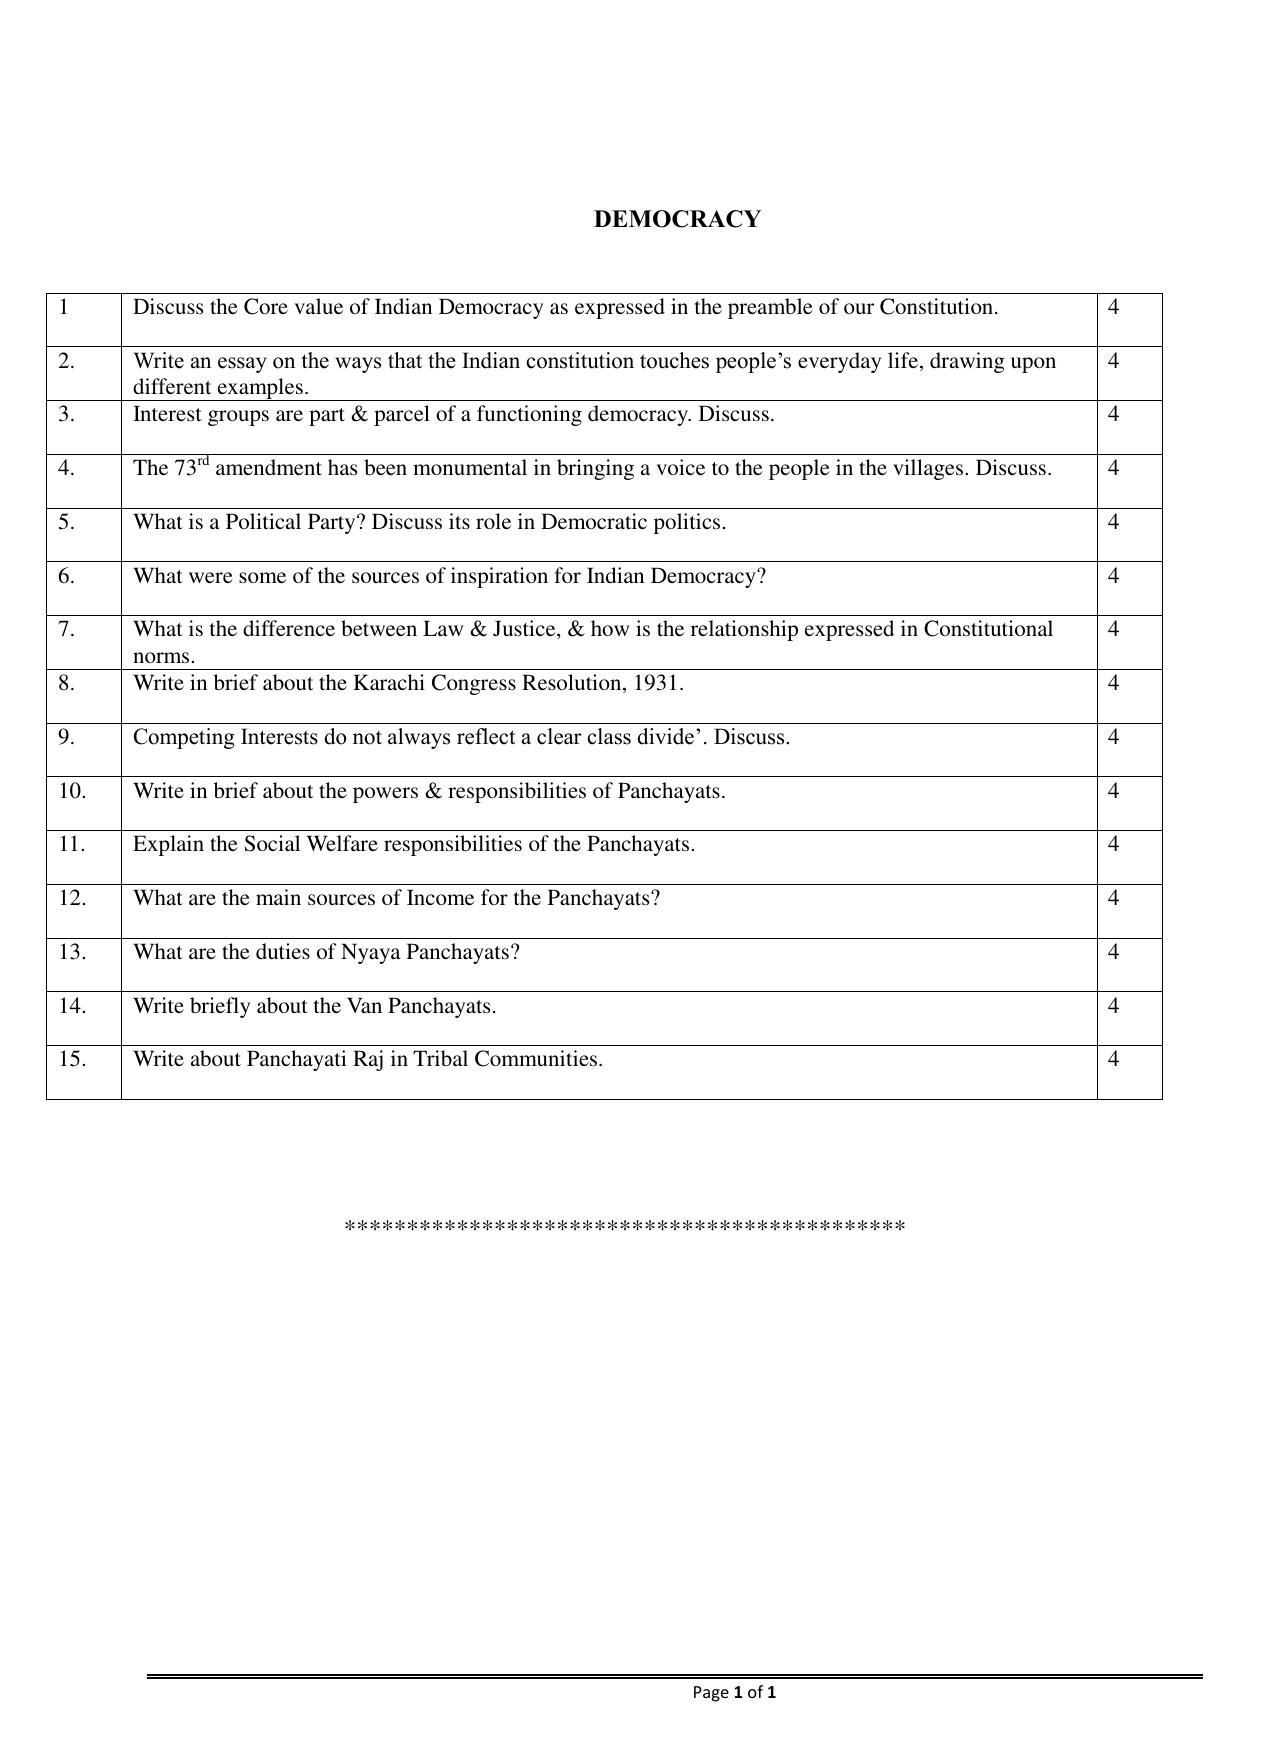 CBSE Class 12 Sociology Democracy Worksheets - Page 1